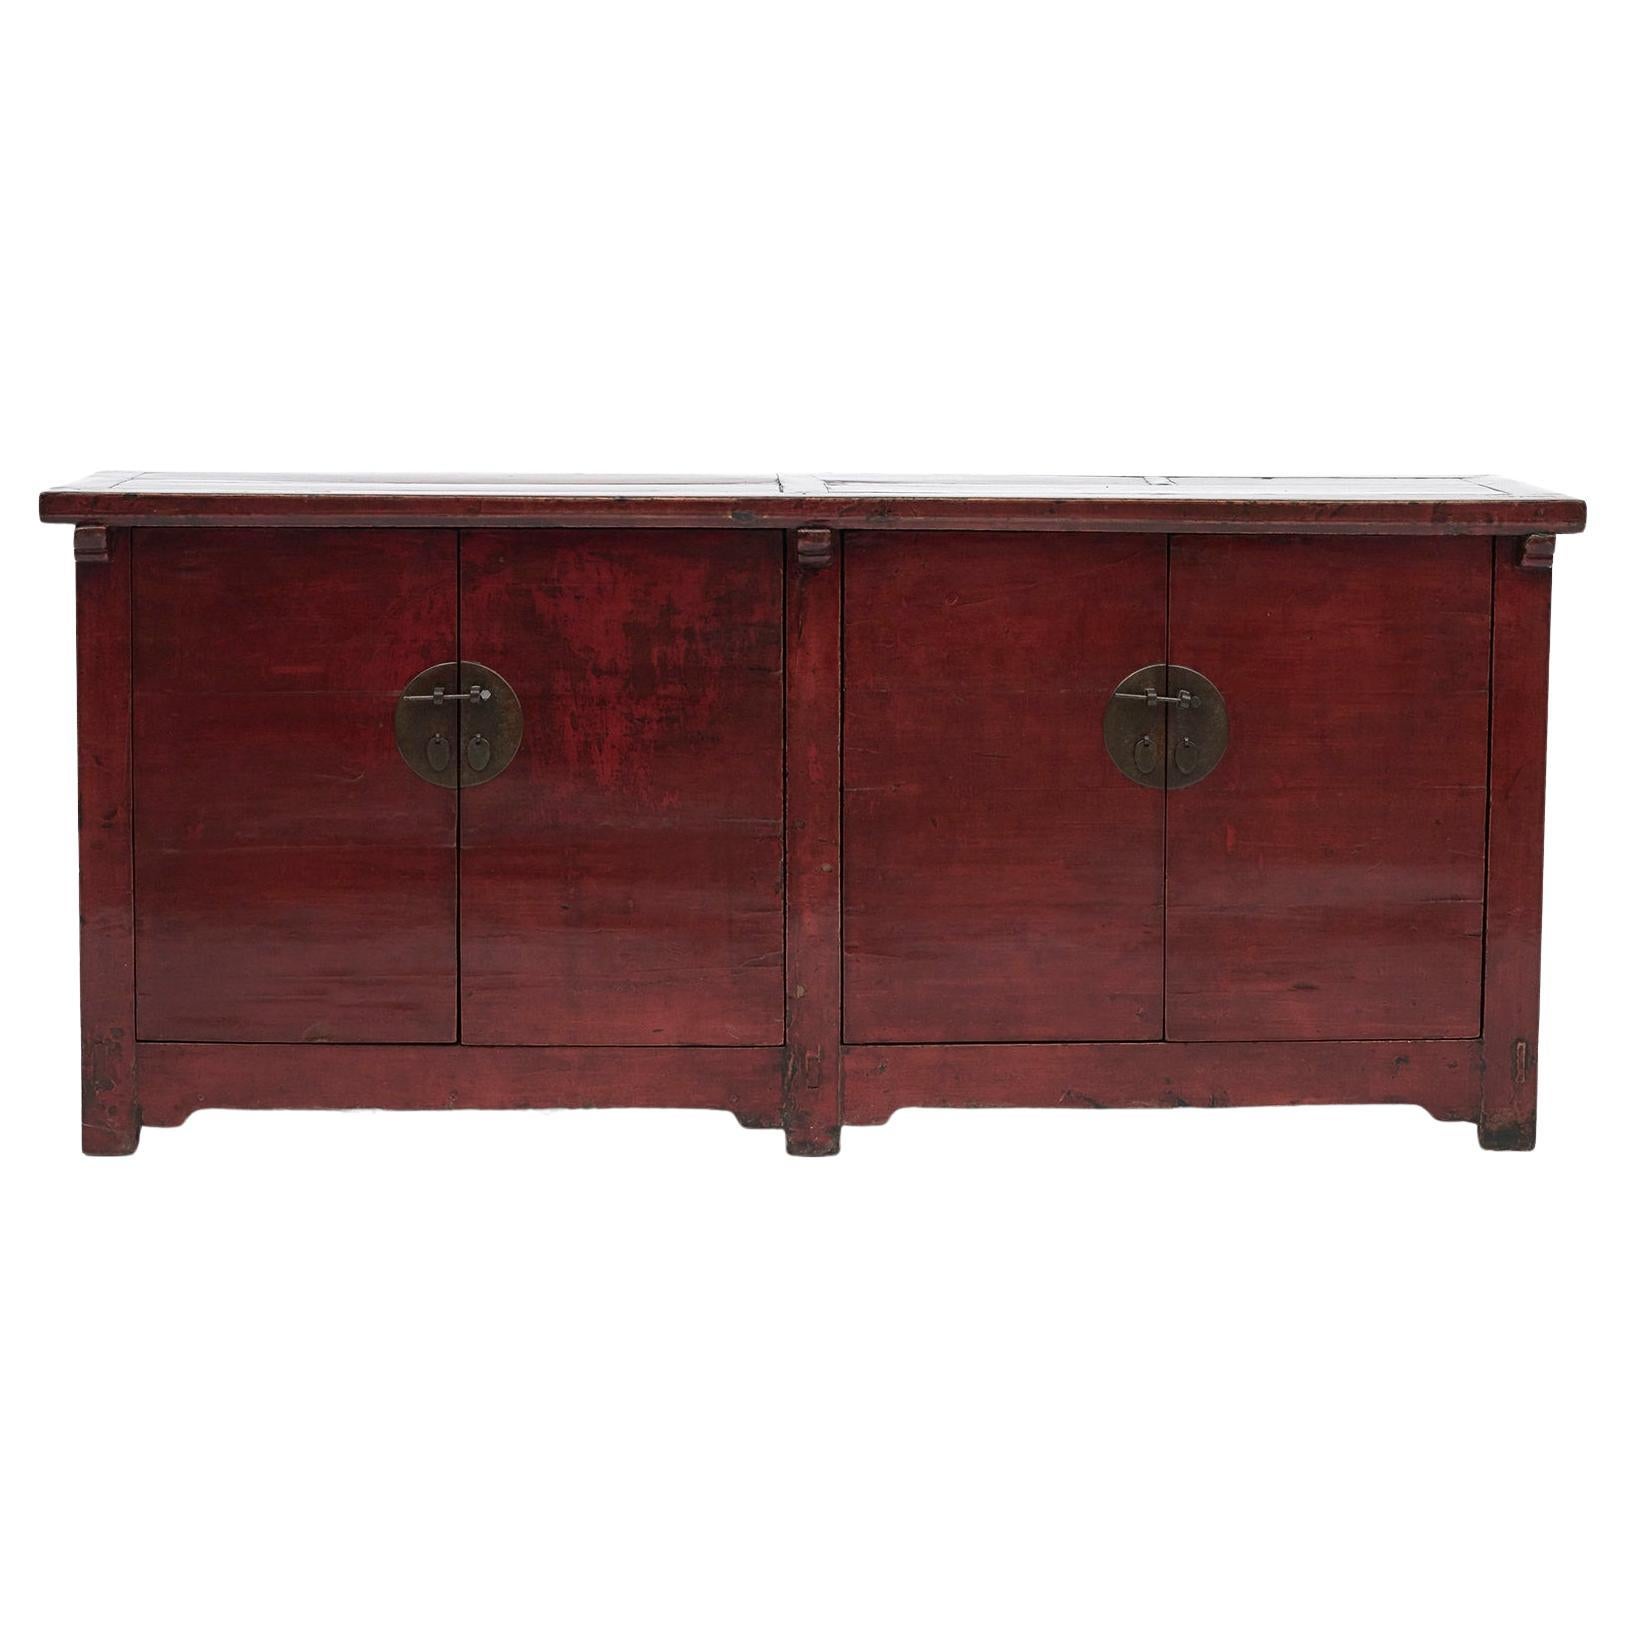 Antique Sideboard, Shanxi Province